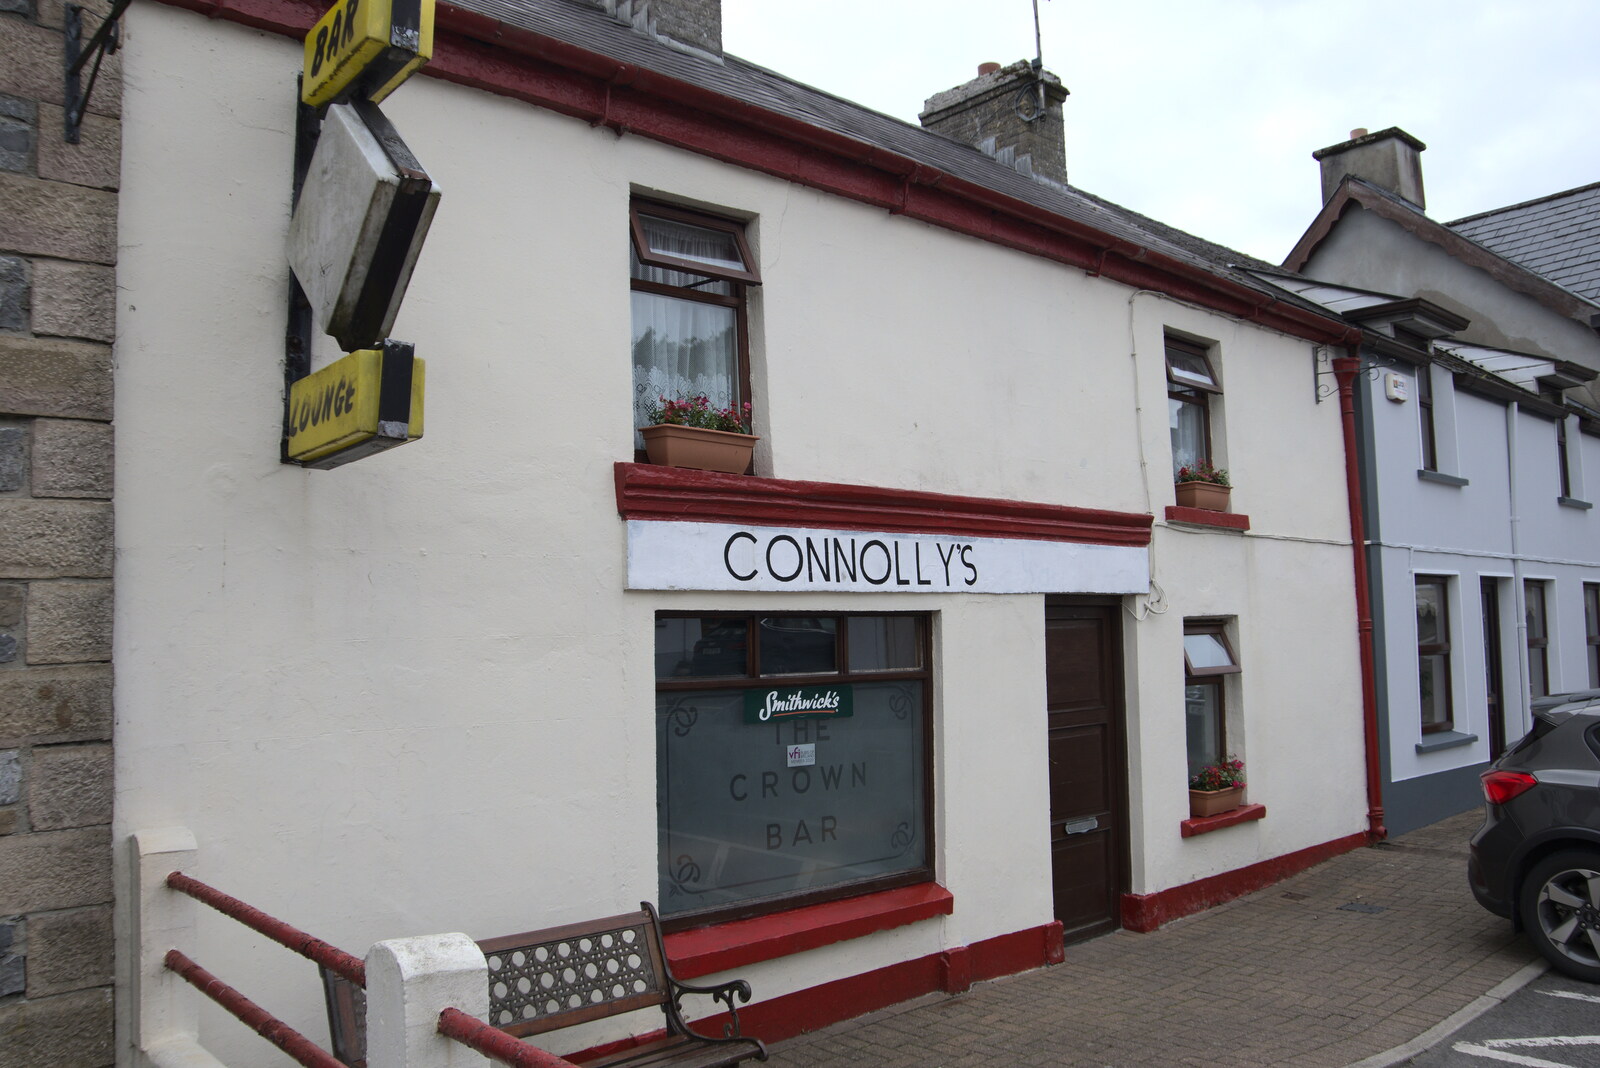 A Trip to Manorhamilton, County Leitrim, Ireland - 11th August 2021: Connolly's is still going